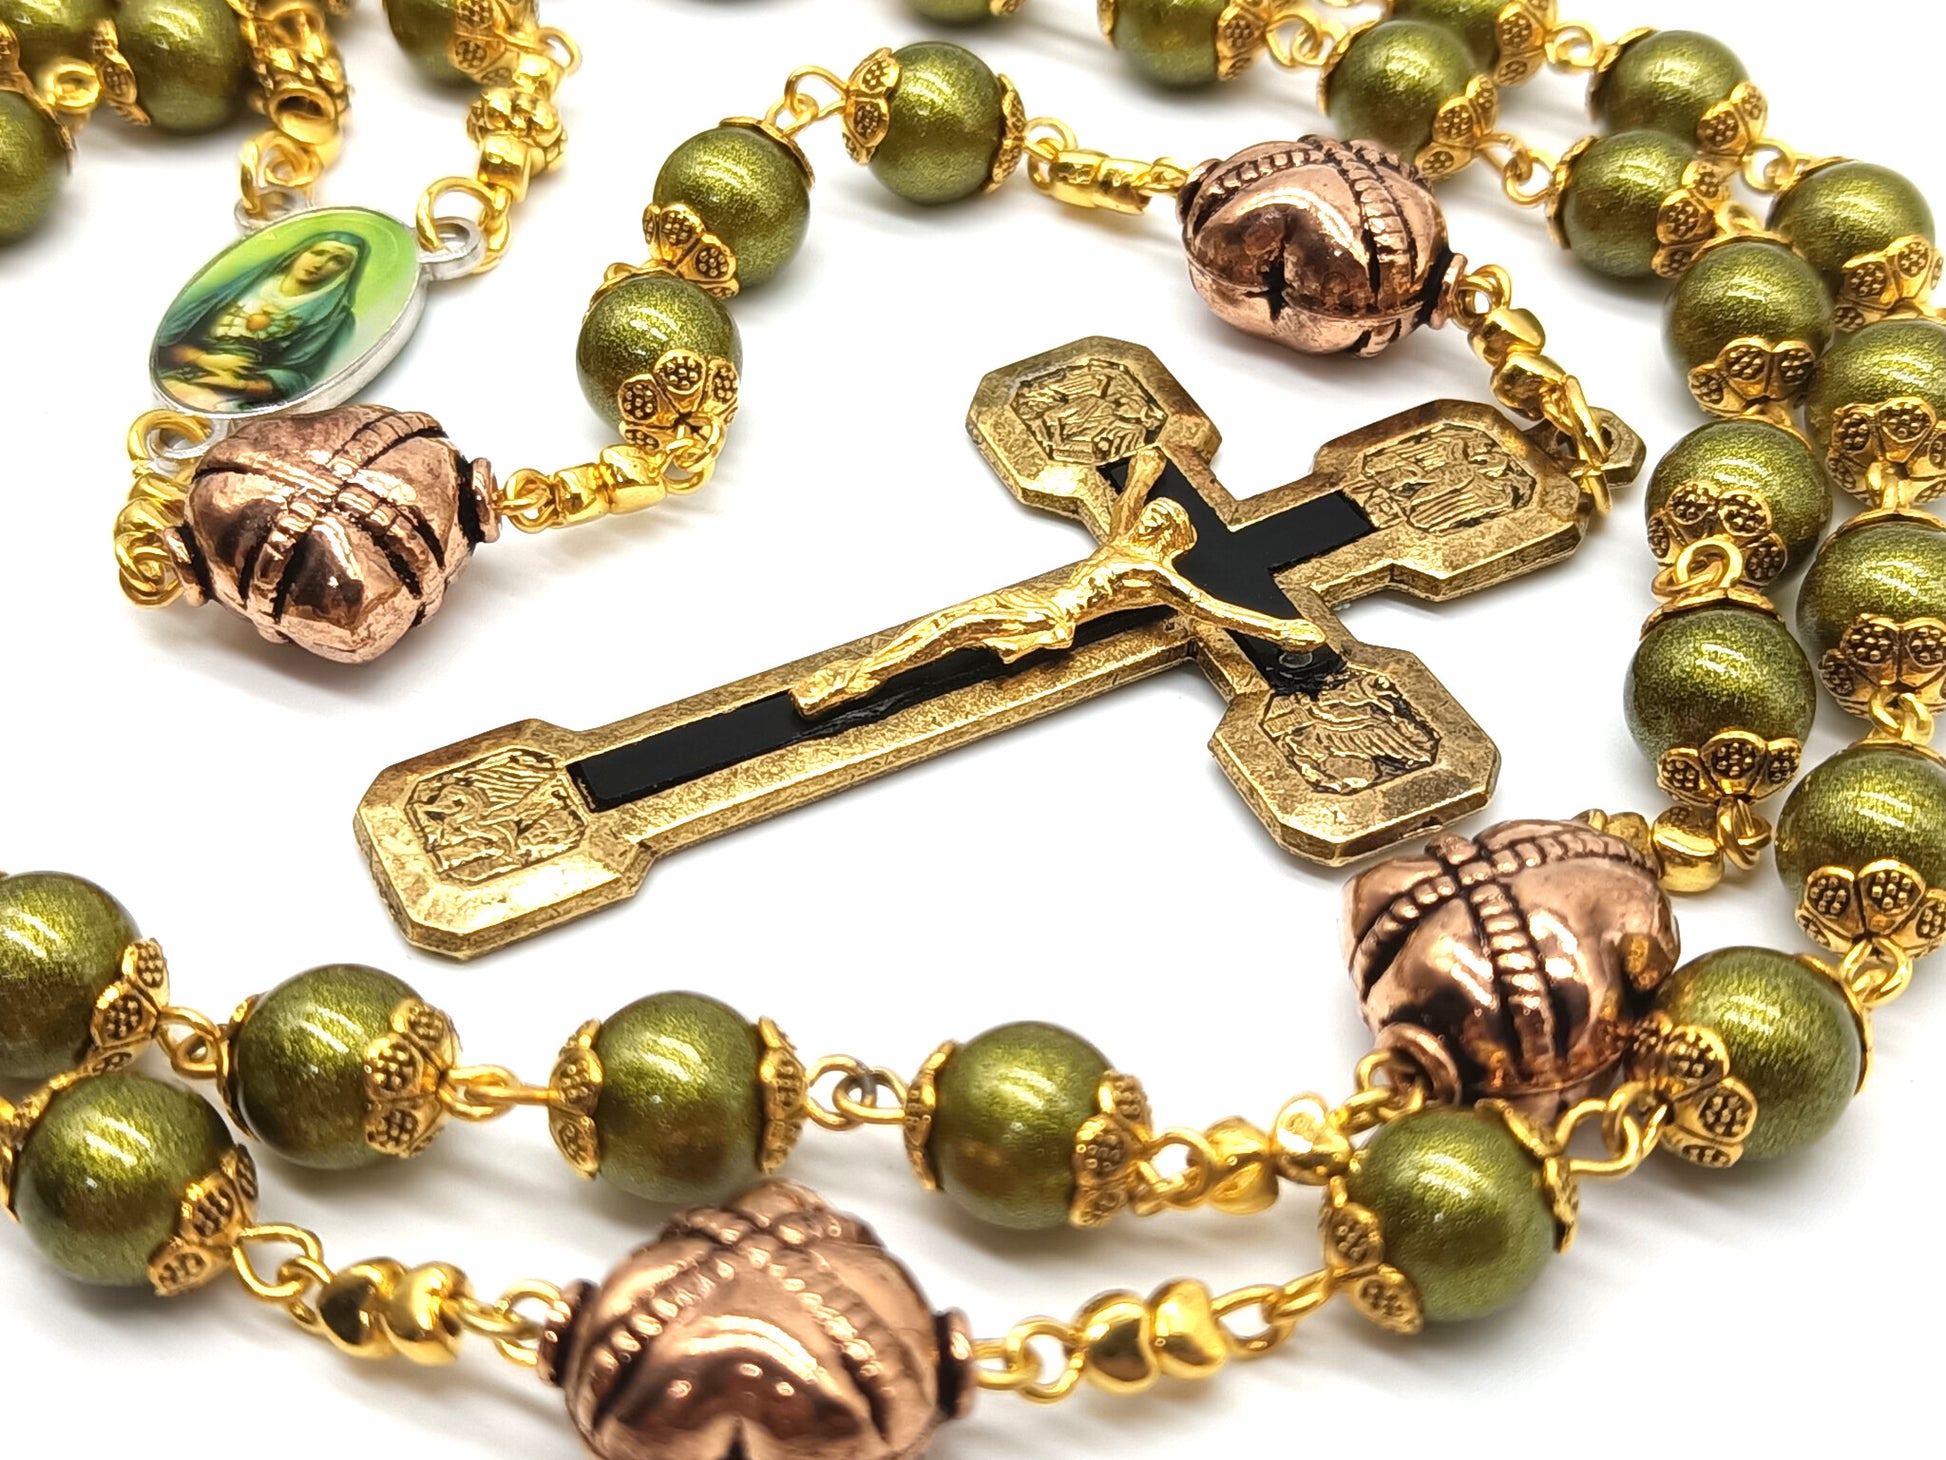 Green glass rosary with copper, gold and black crucifix and Our Lady of Sorrows medal.